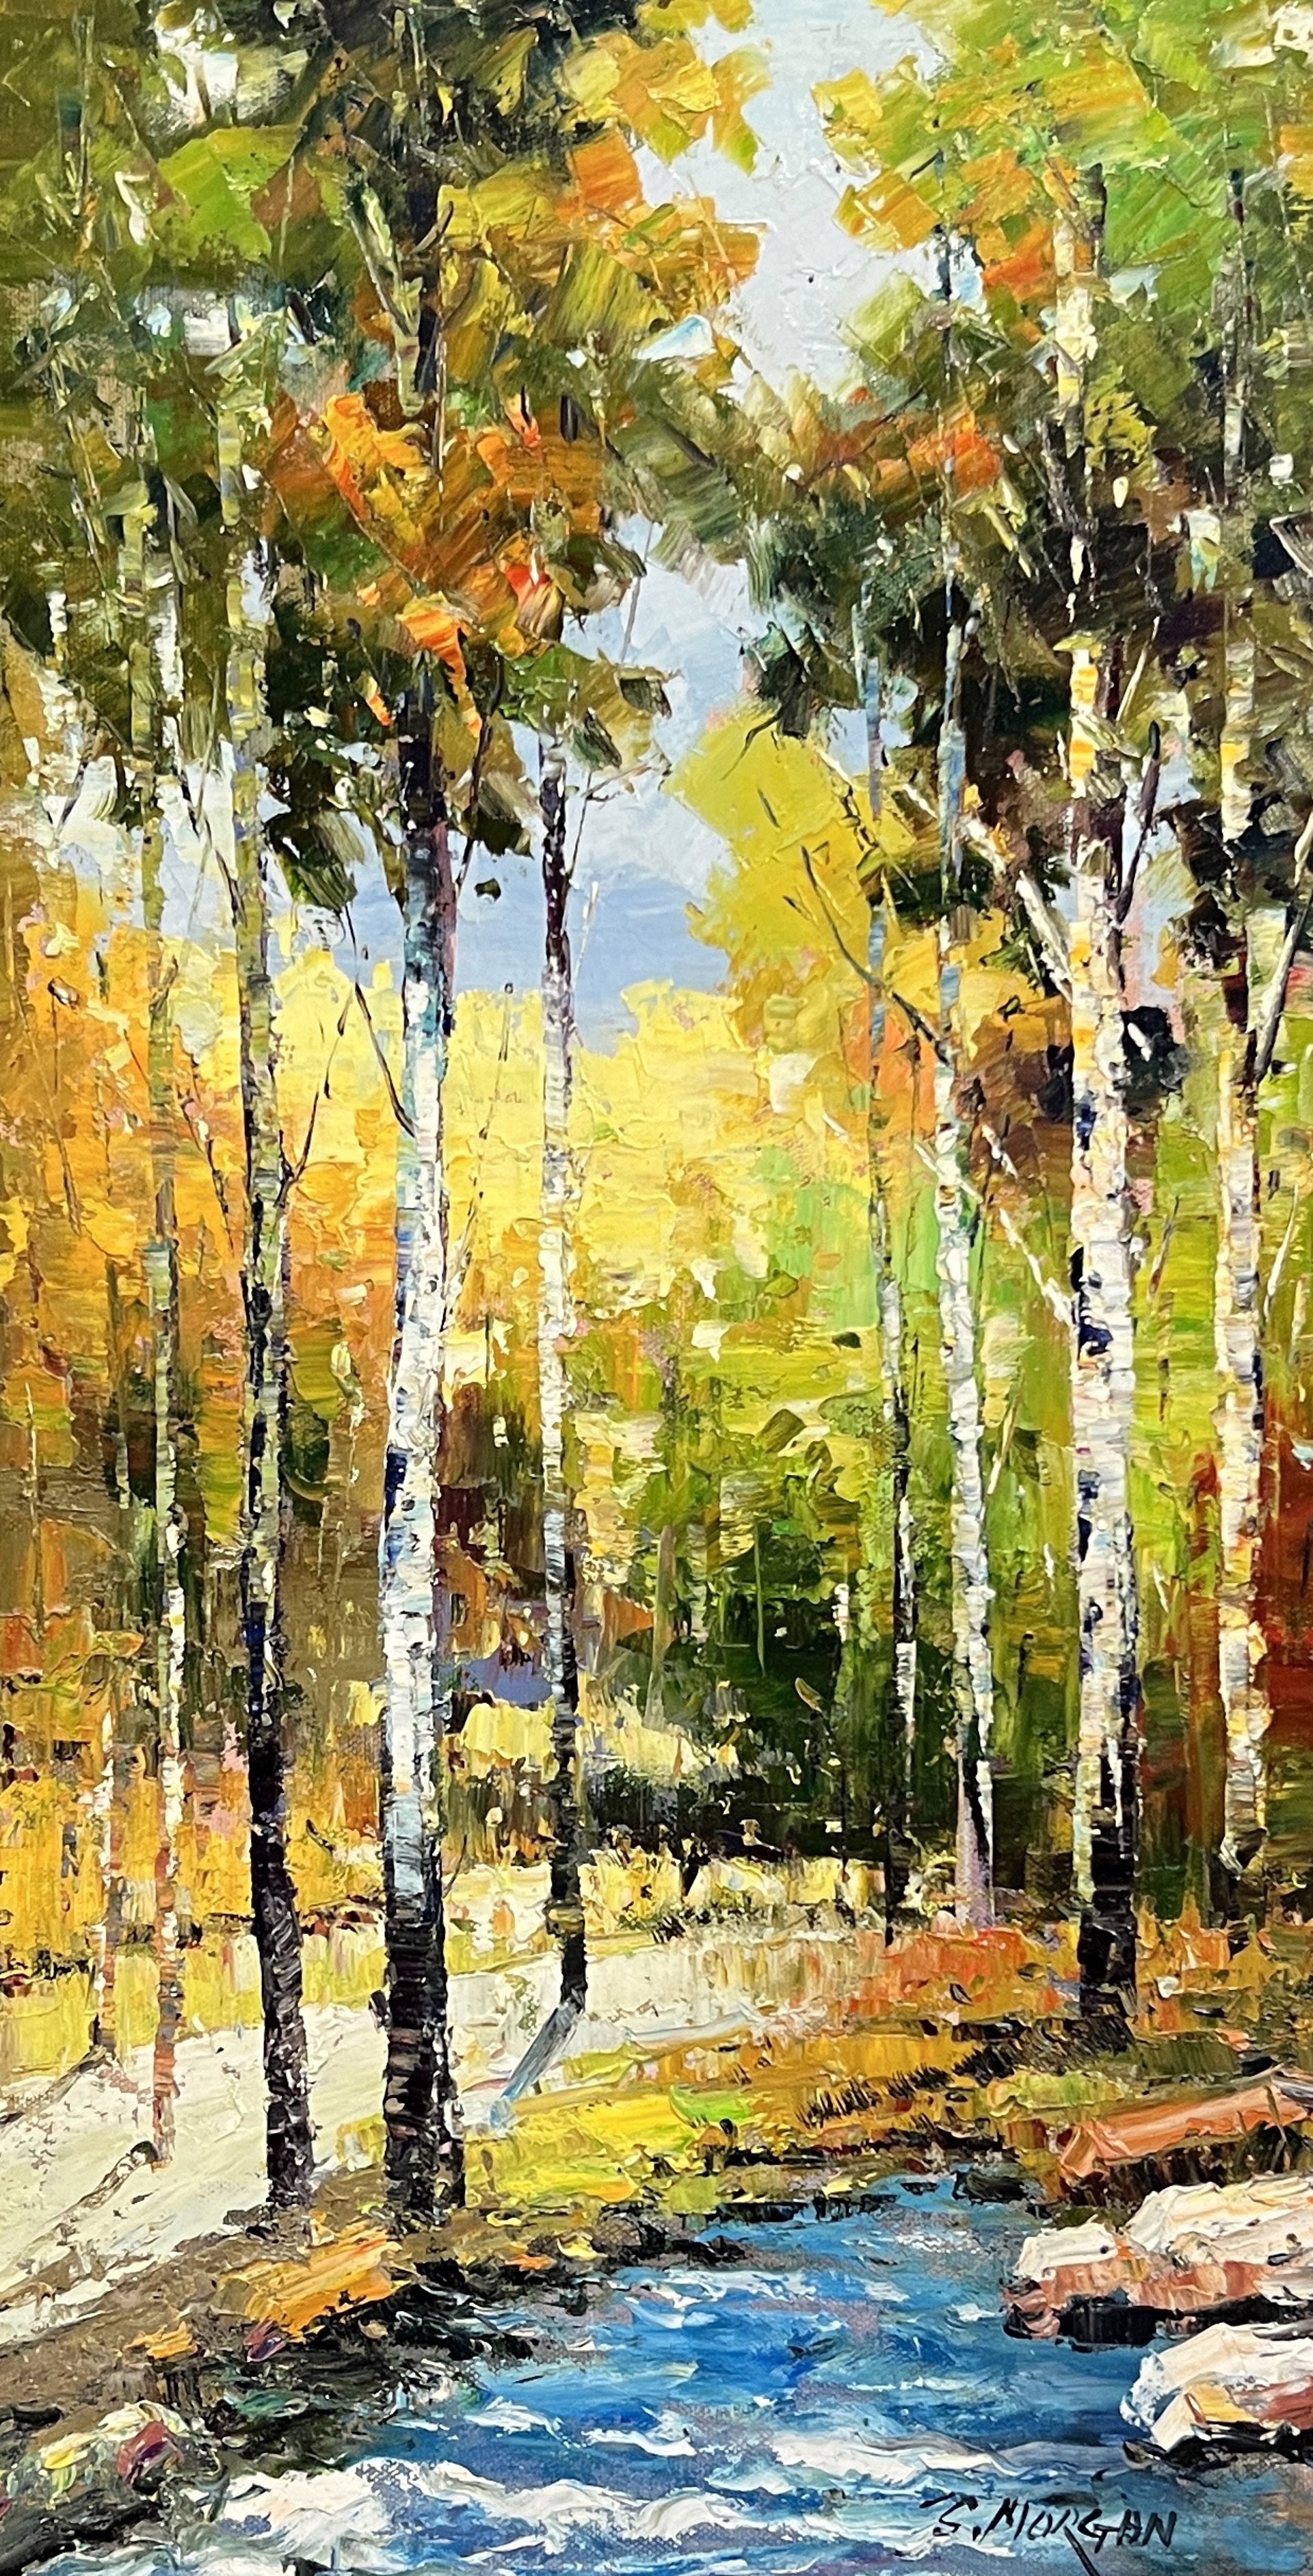 BIRCHES BY THE CREEK by J MORGAN